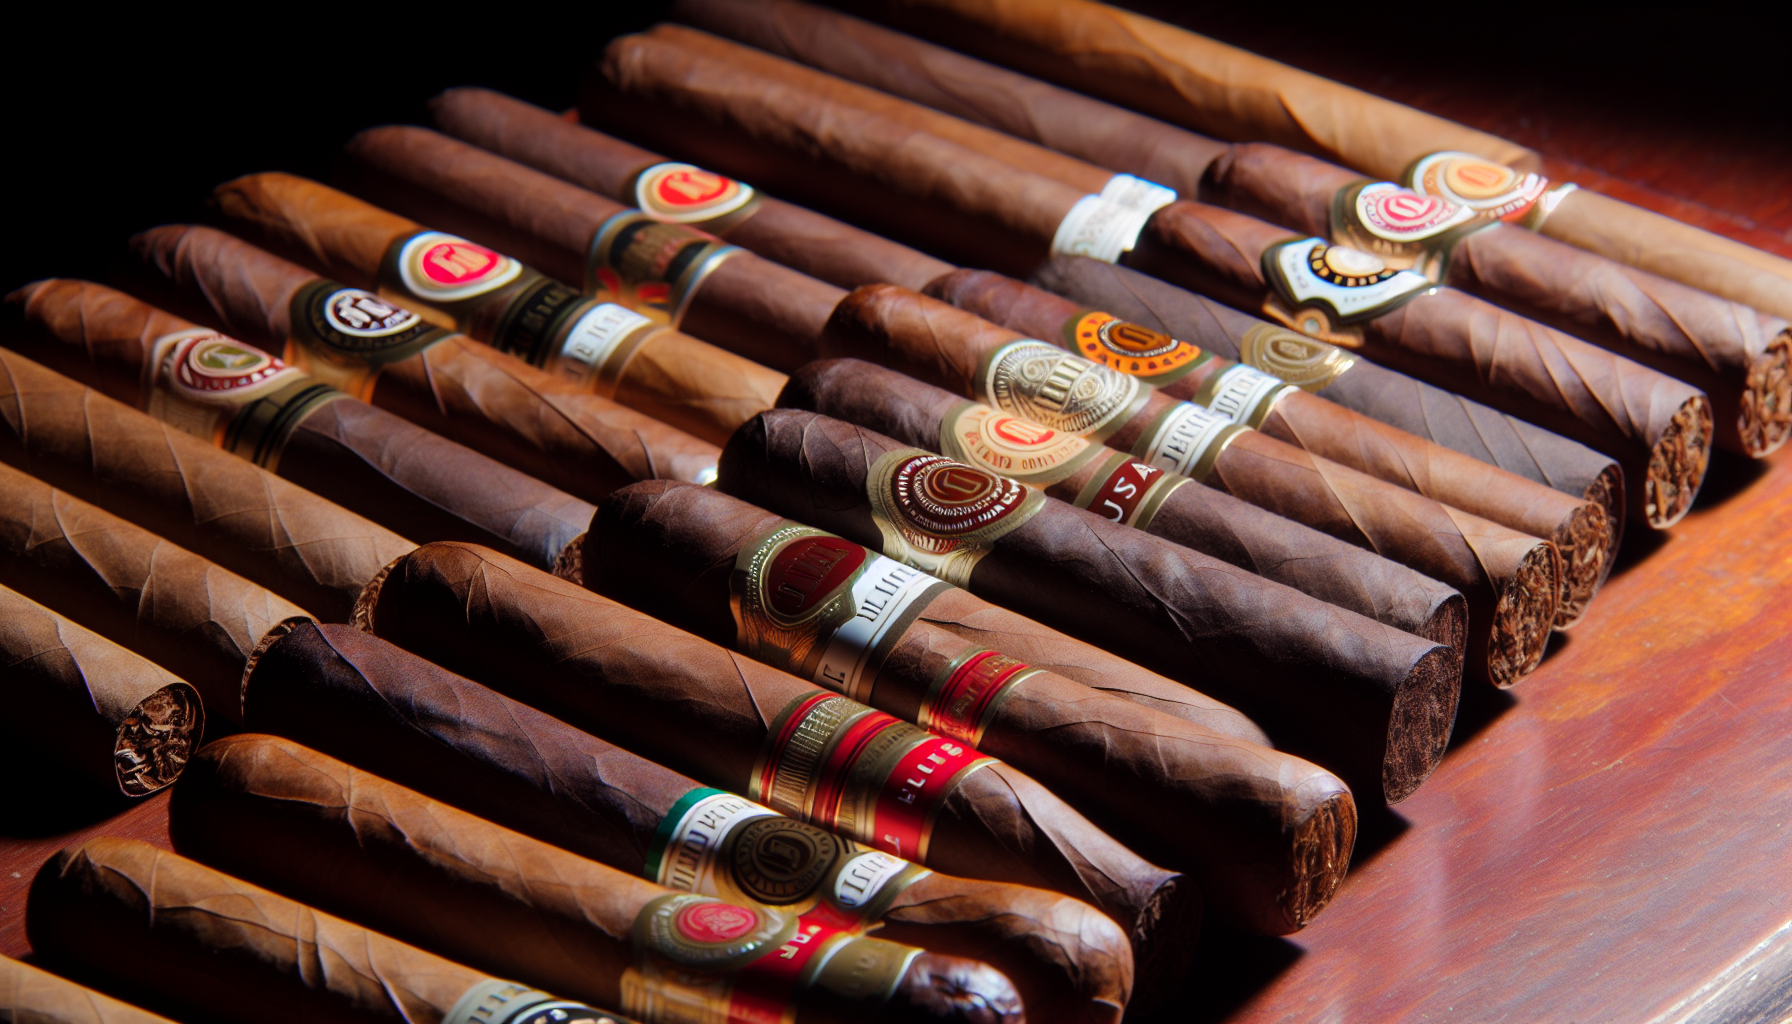 Diverse range of handmade cigars with different flavor profiles